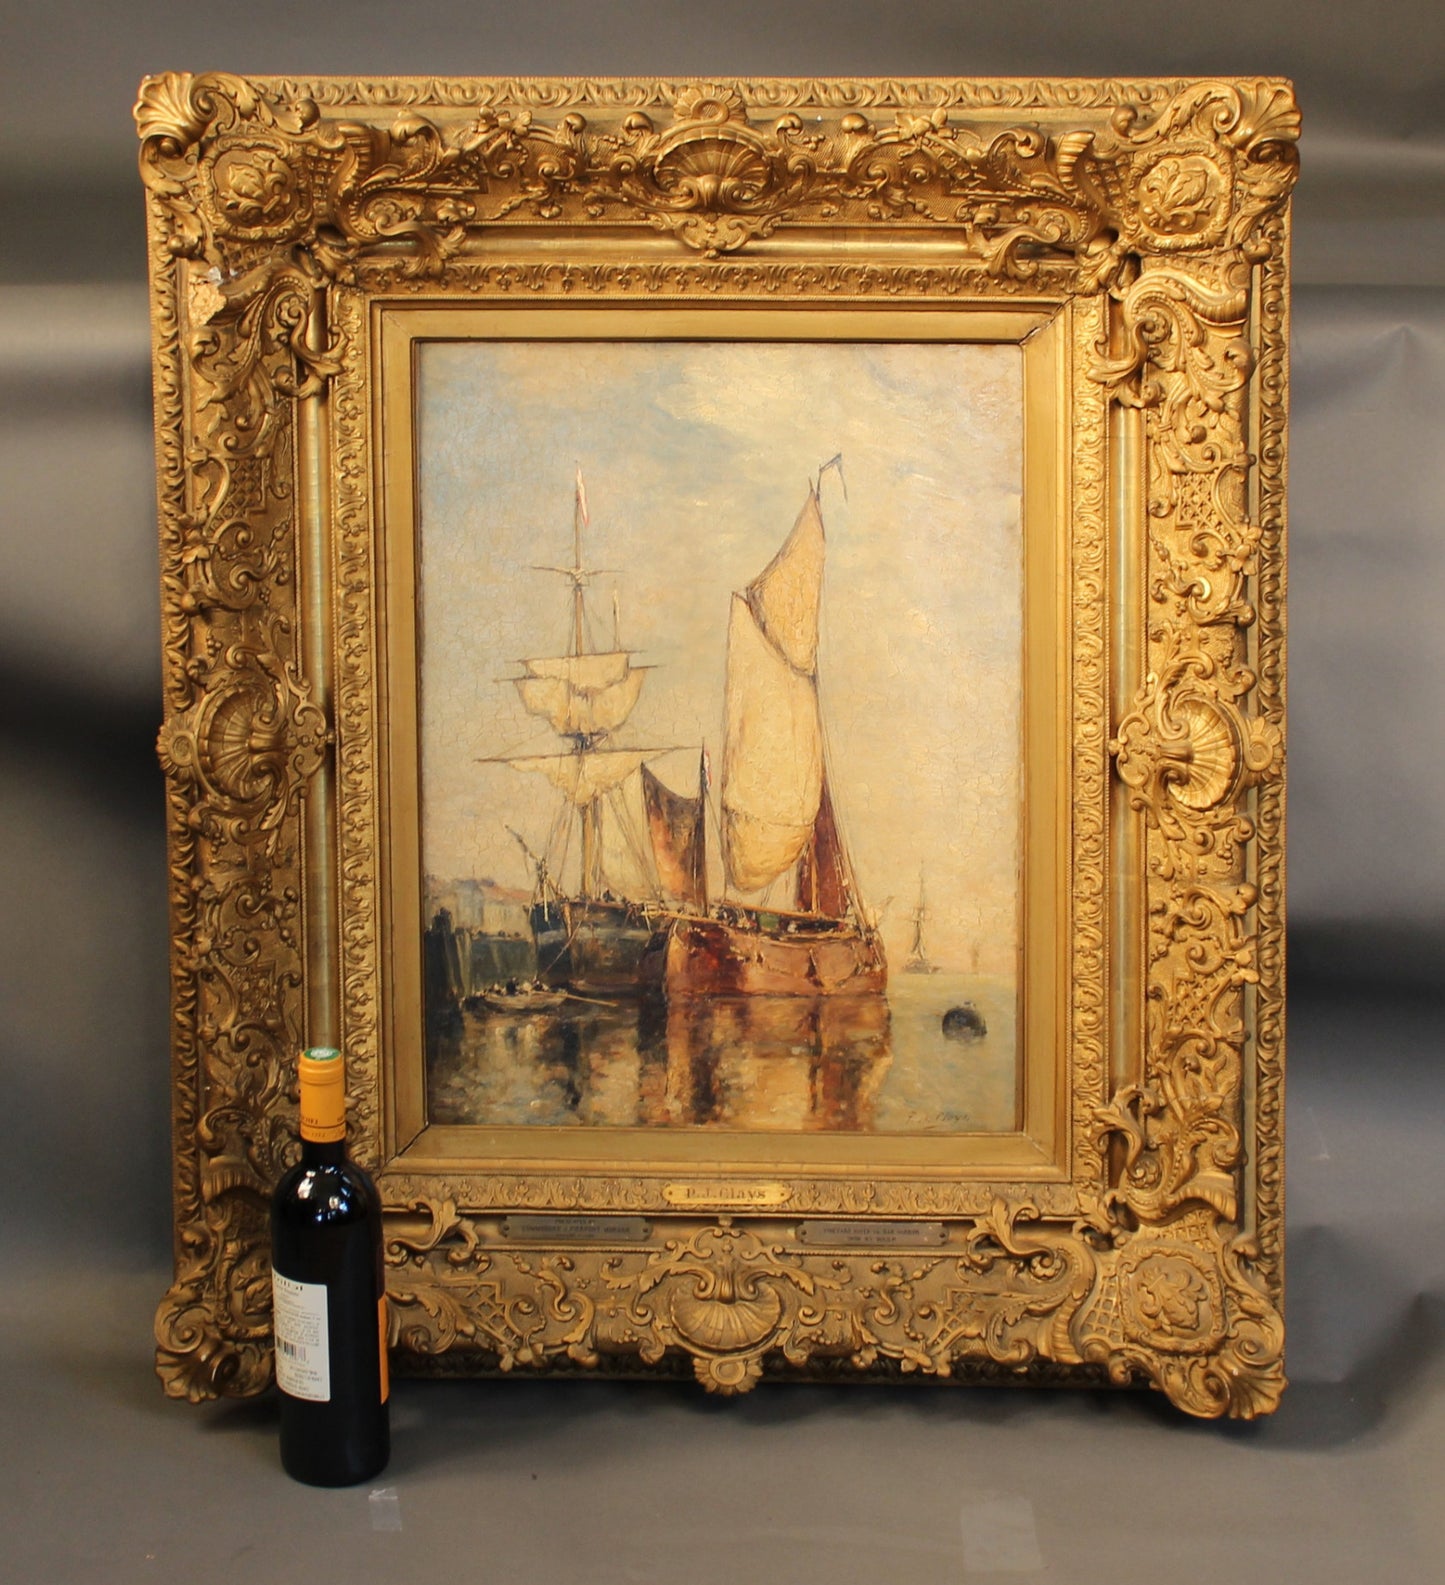 Oil on Canvas by P.J. Clays, Gift to J.P. Morgan, 1897 - Lannan Gallery